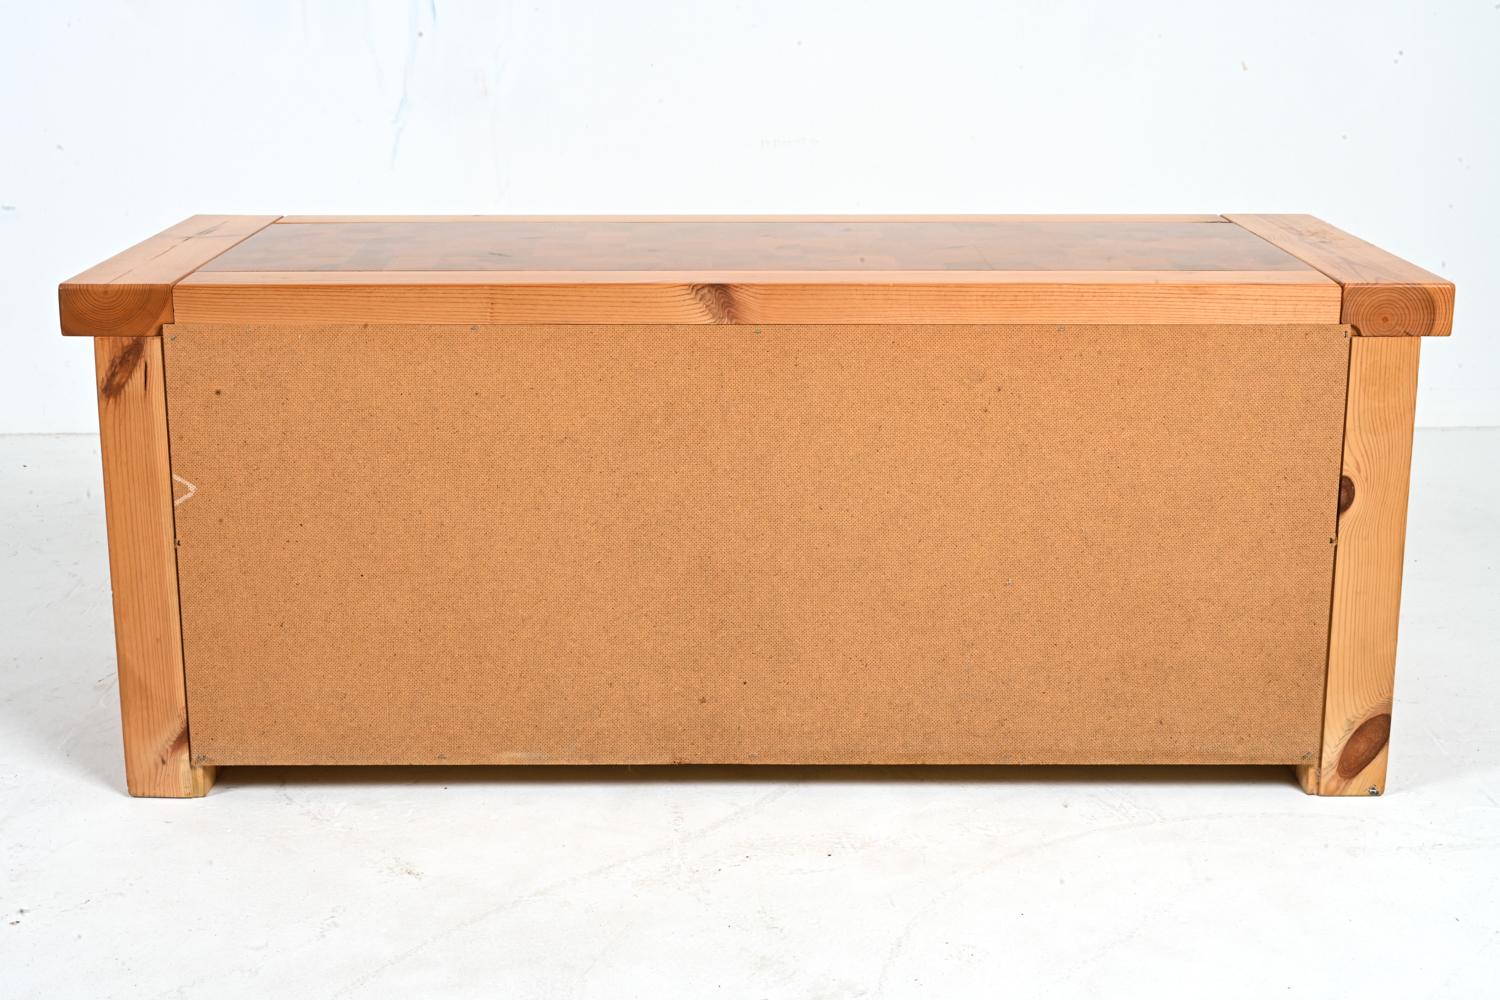 Rolf Middleboe for Tranekær Pine Parquetry Chest, 1970's For Sale 8